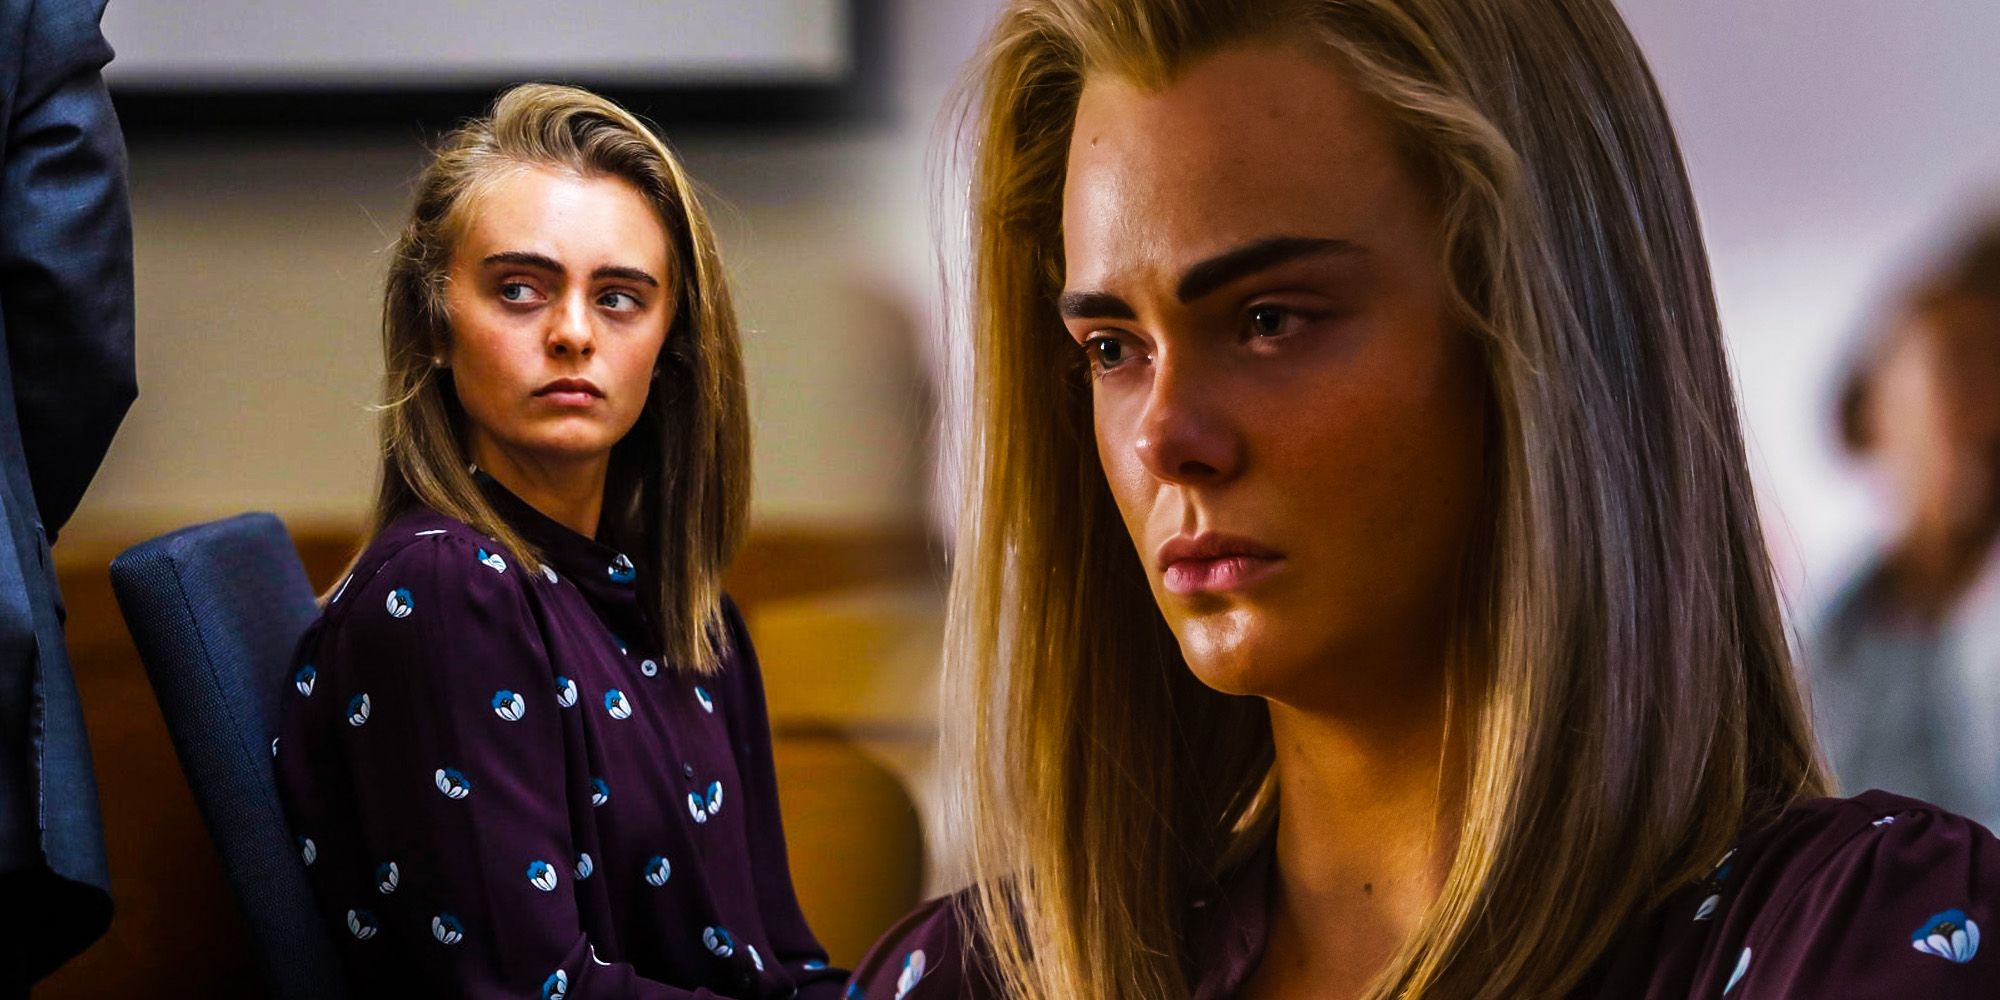 Girl From Plainville: What Happened To Michelle Carter? Is She In Jail?